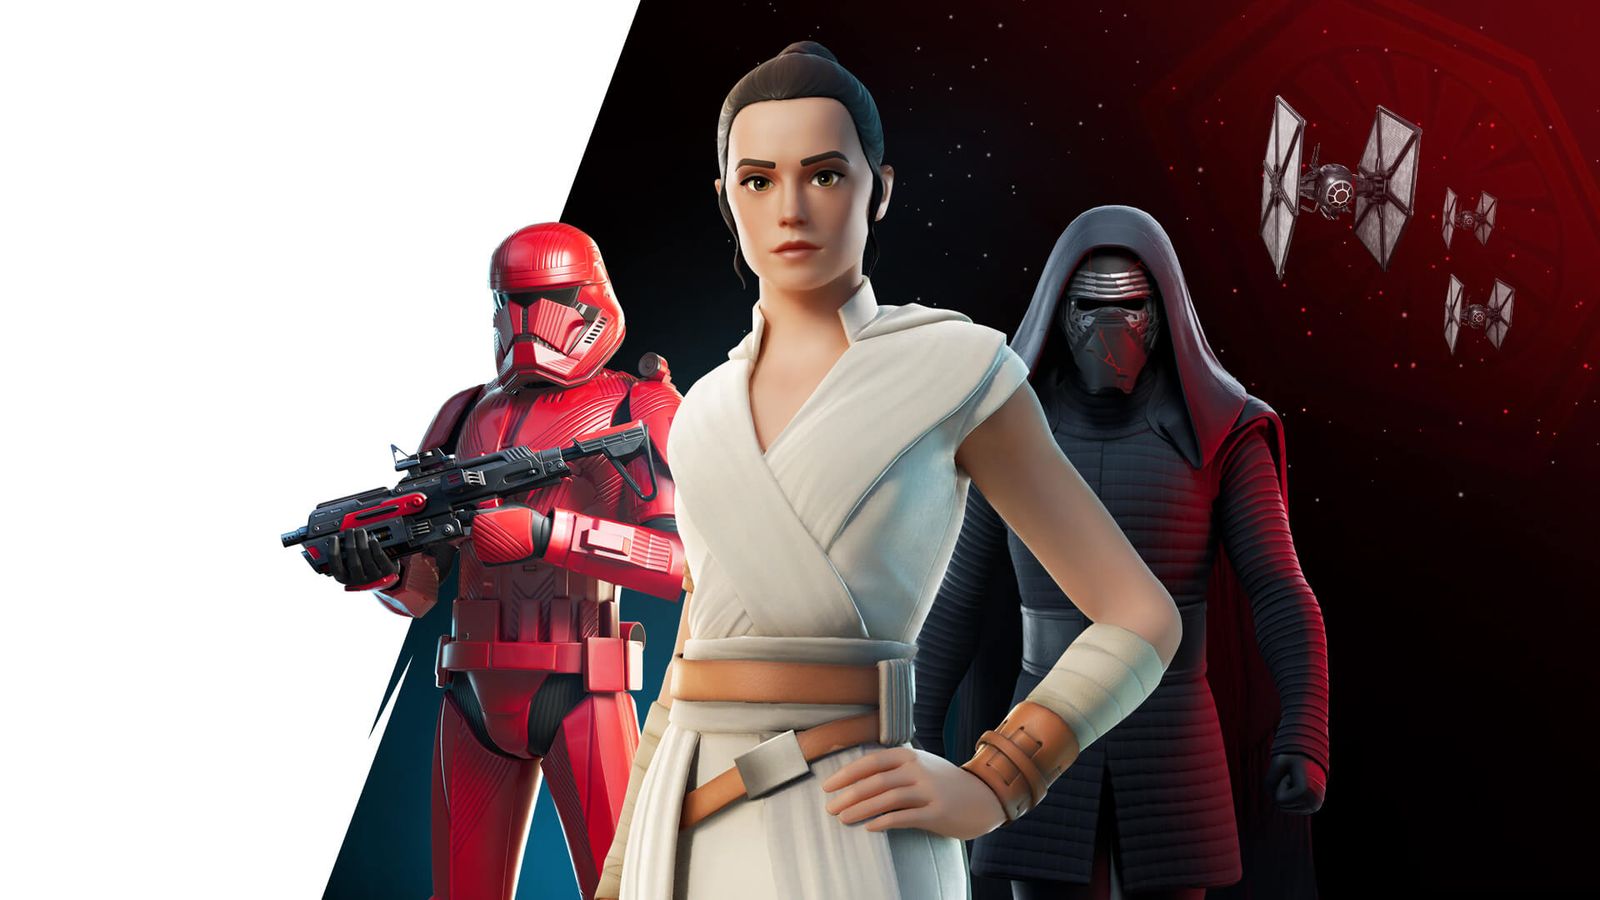 Rey and other Star Wars characters in Fortnite.